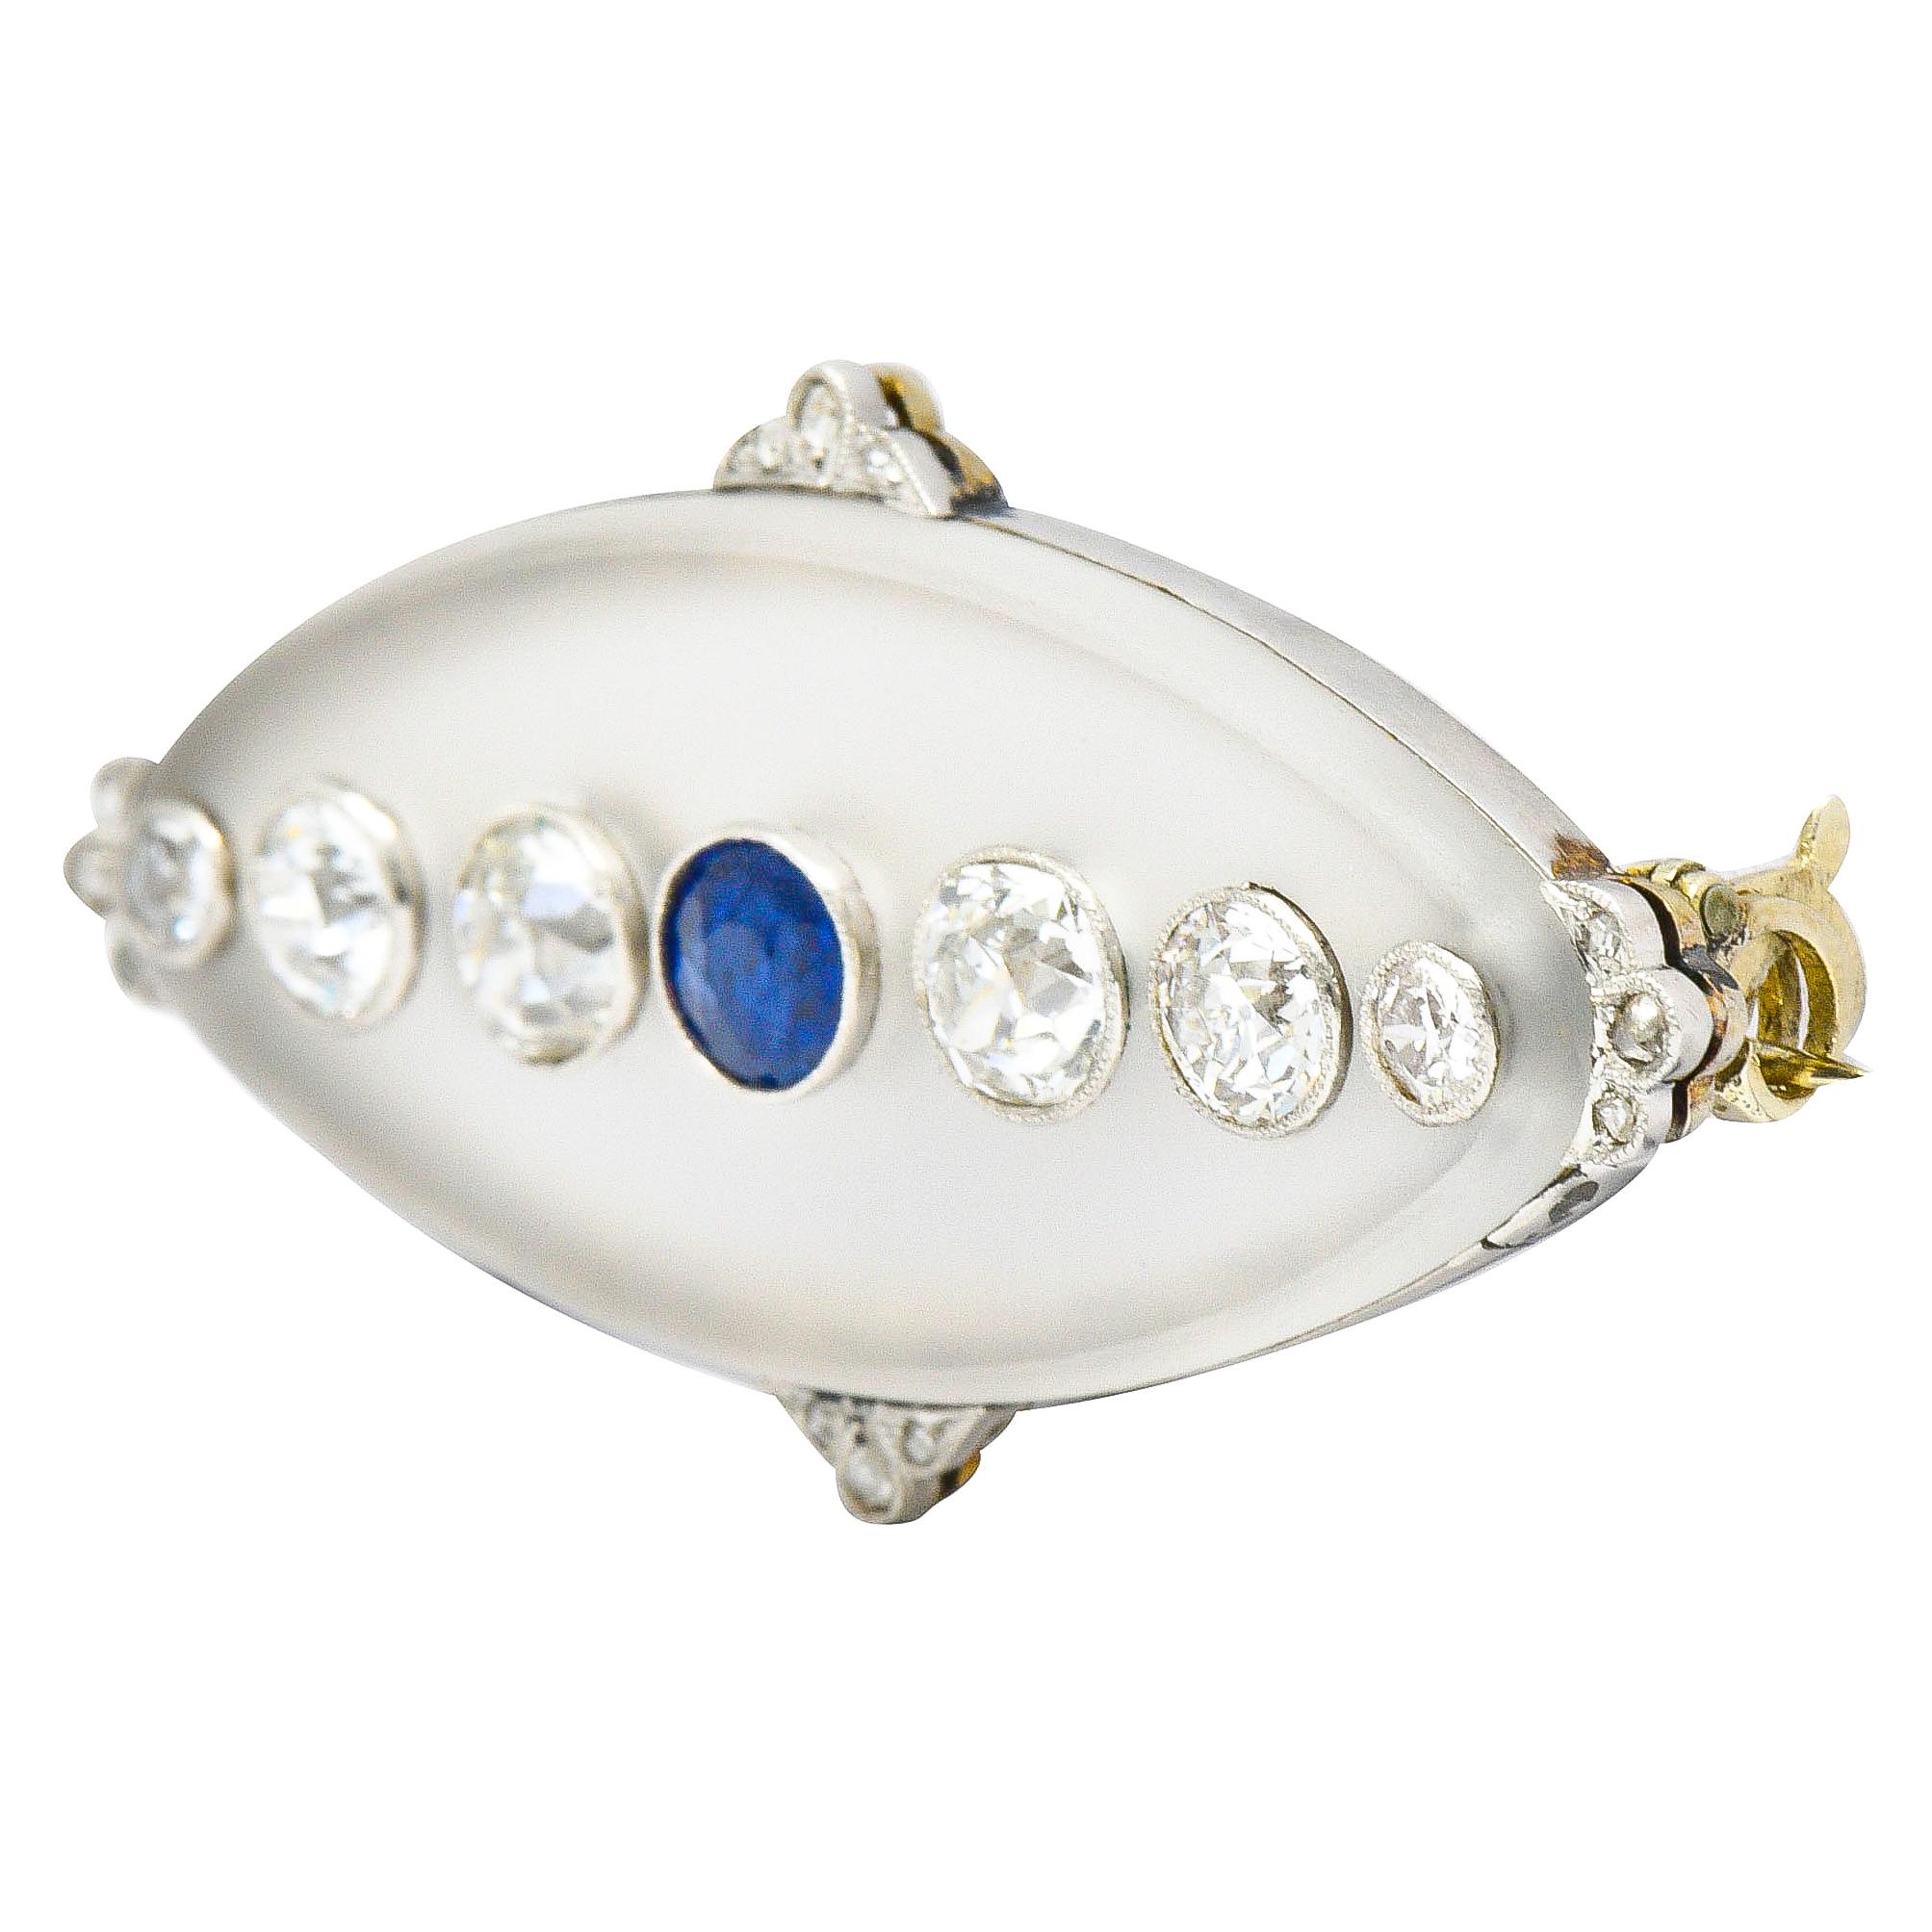 Elongated oval brooch is comprised of frosted camphor glass measuring approximately 37.0 x 15.5 mm

Centering a bezel set round cut sapphire, bright blue in color, and weighs approximately 0.38 carat

Flanked by old European cut diamonds weighing in